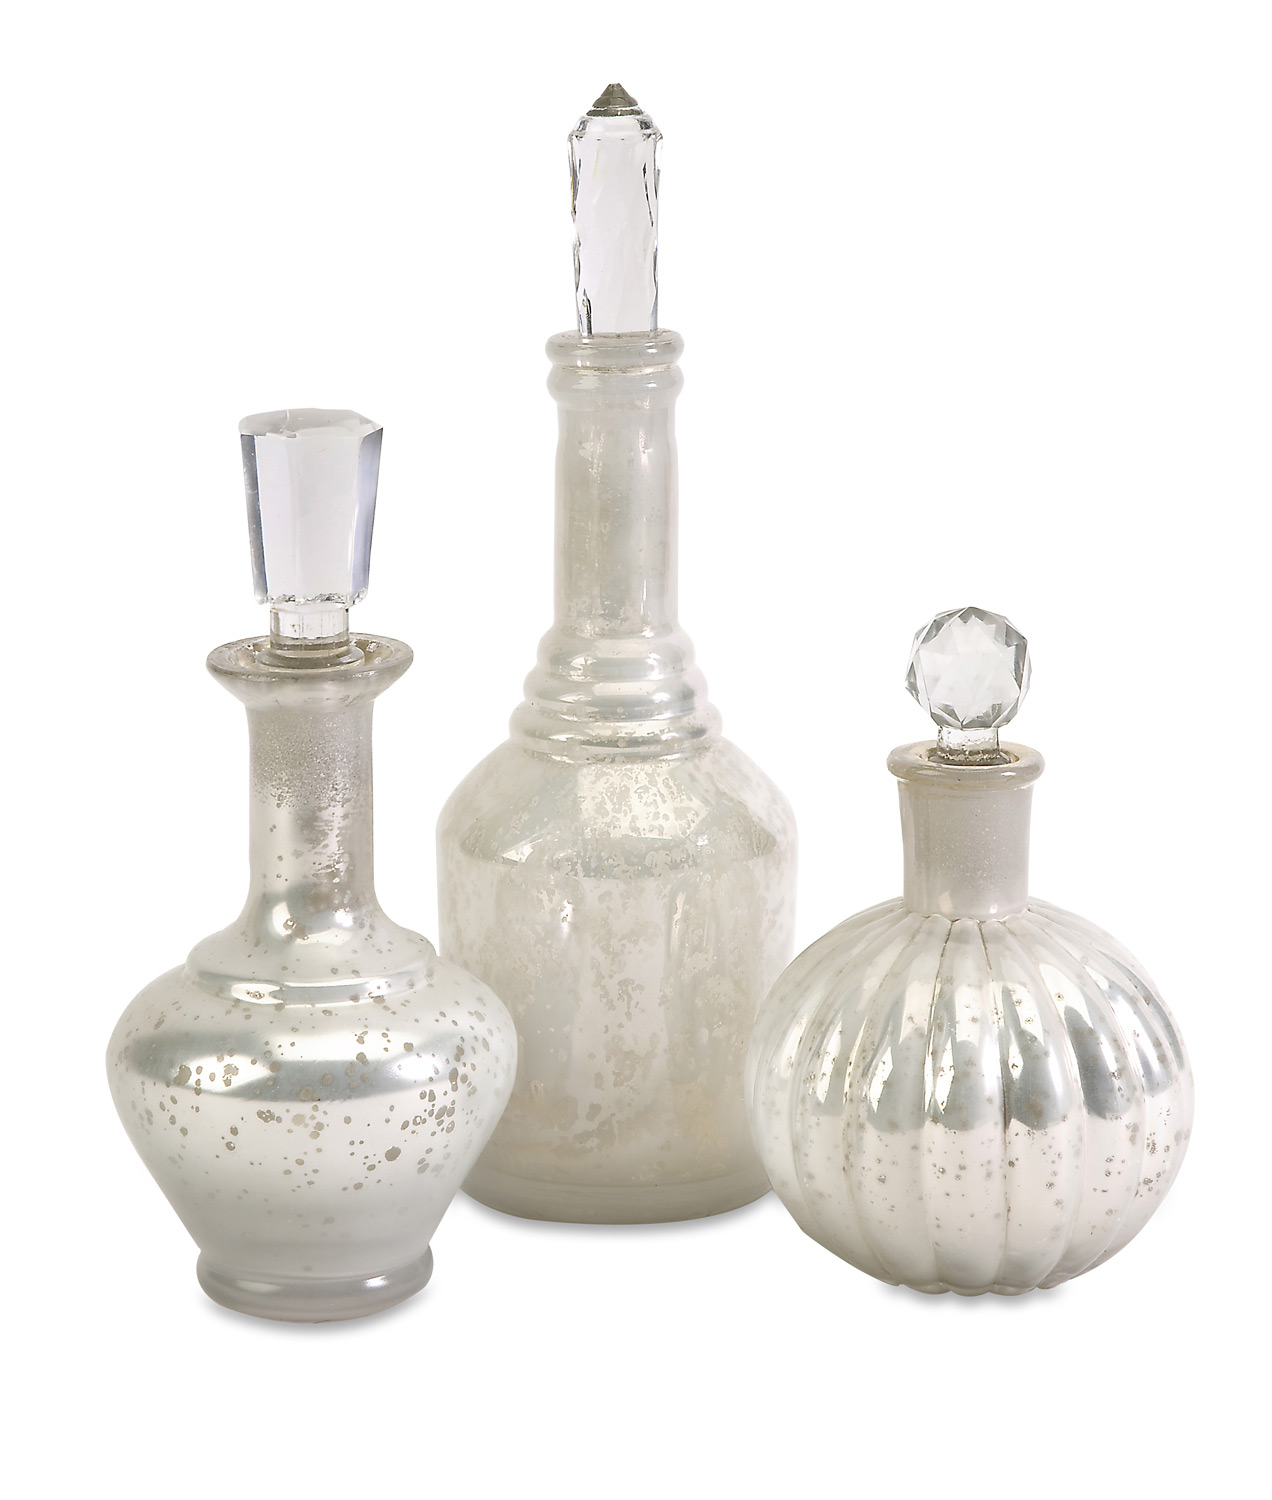 IMAX Curran Glass Bottles with Stoppers - Set of 3